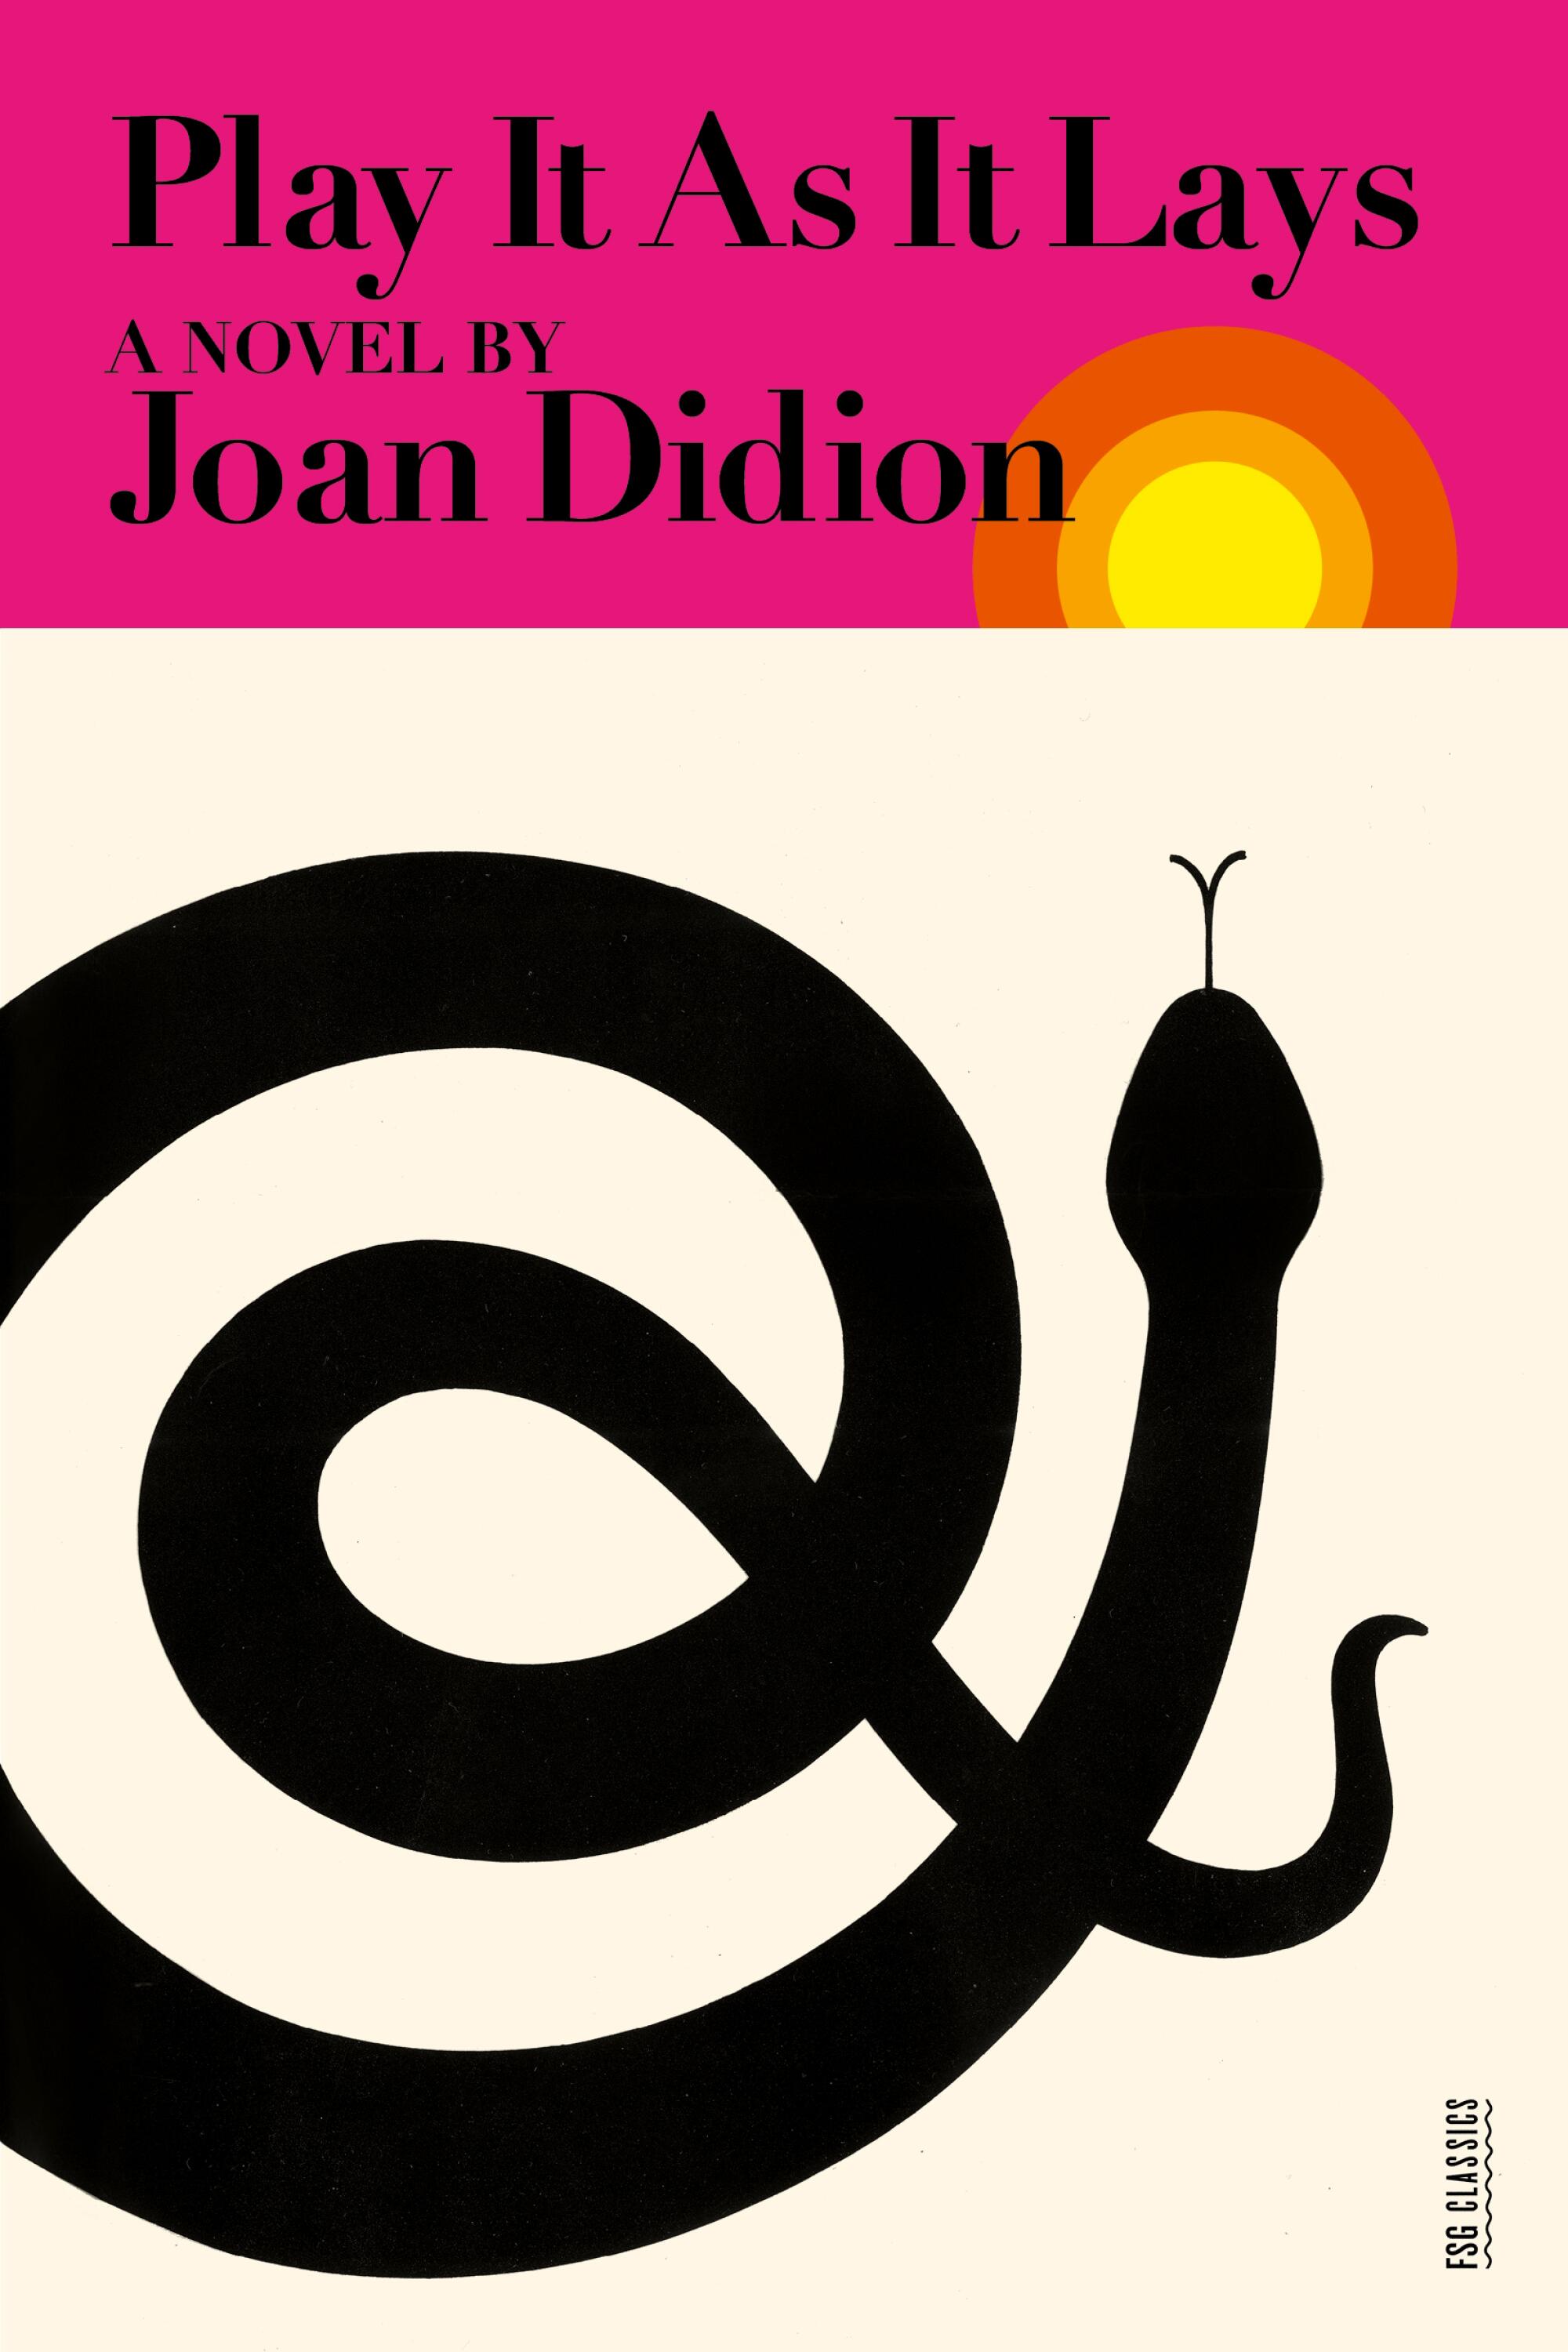 "Play It As It Lays" by Joan Didion